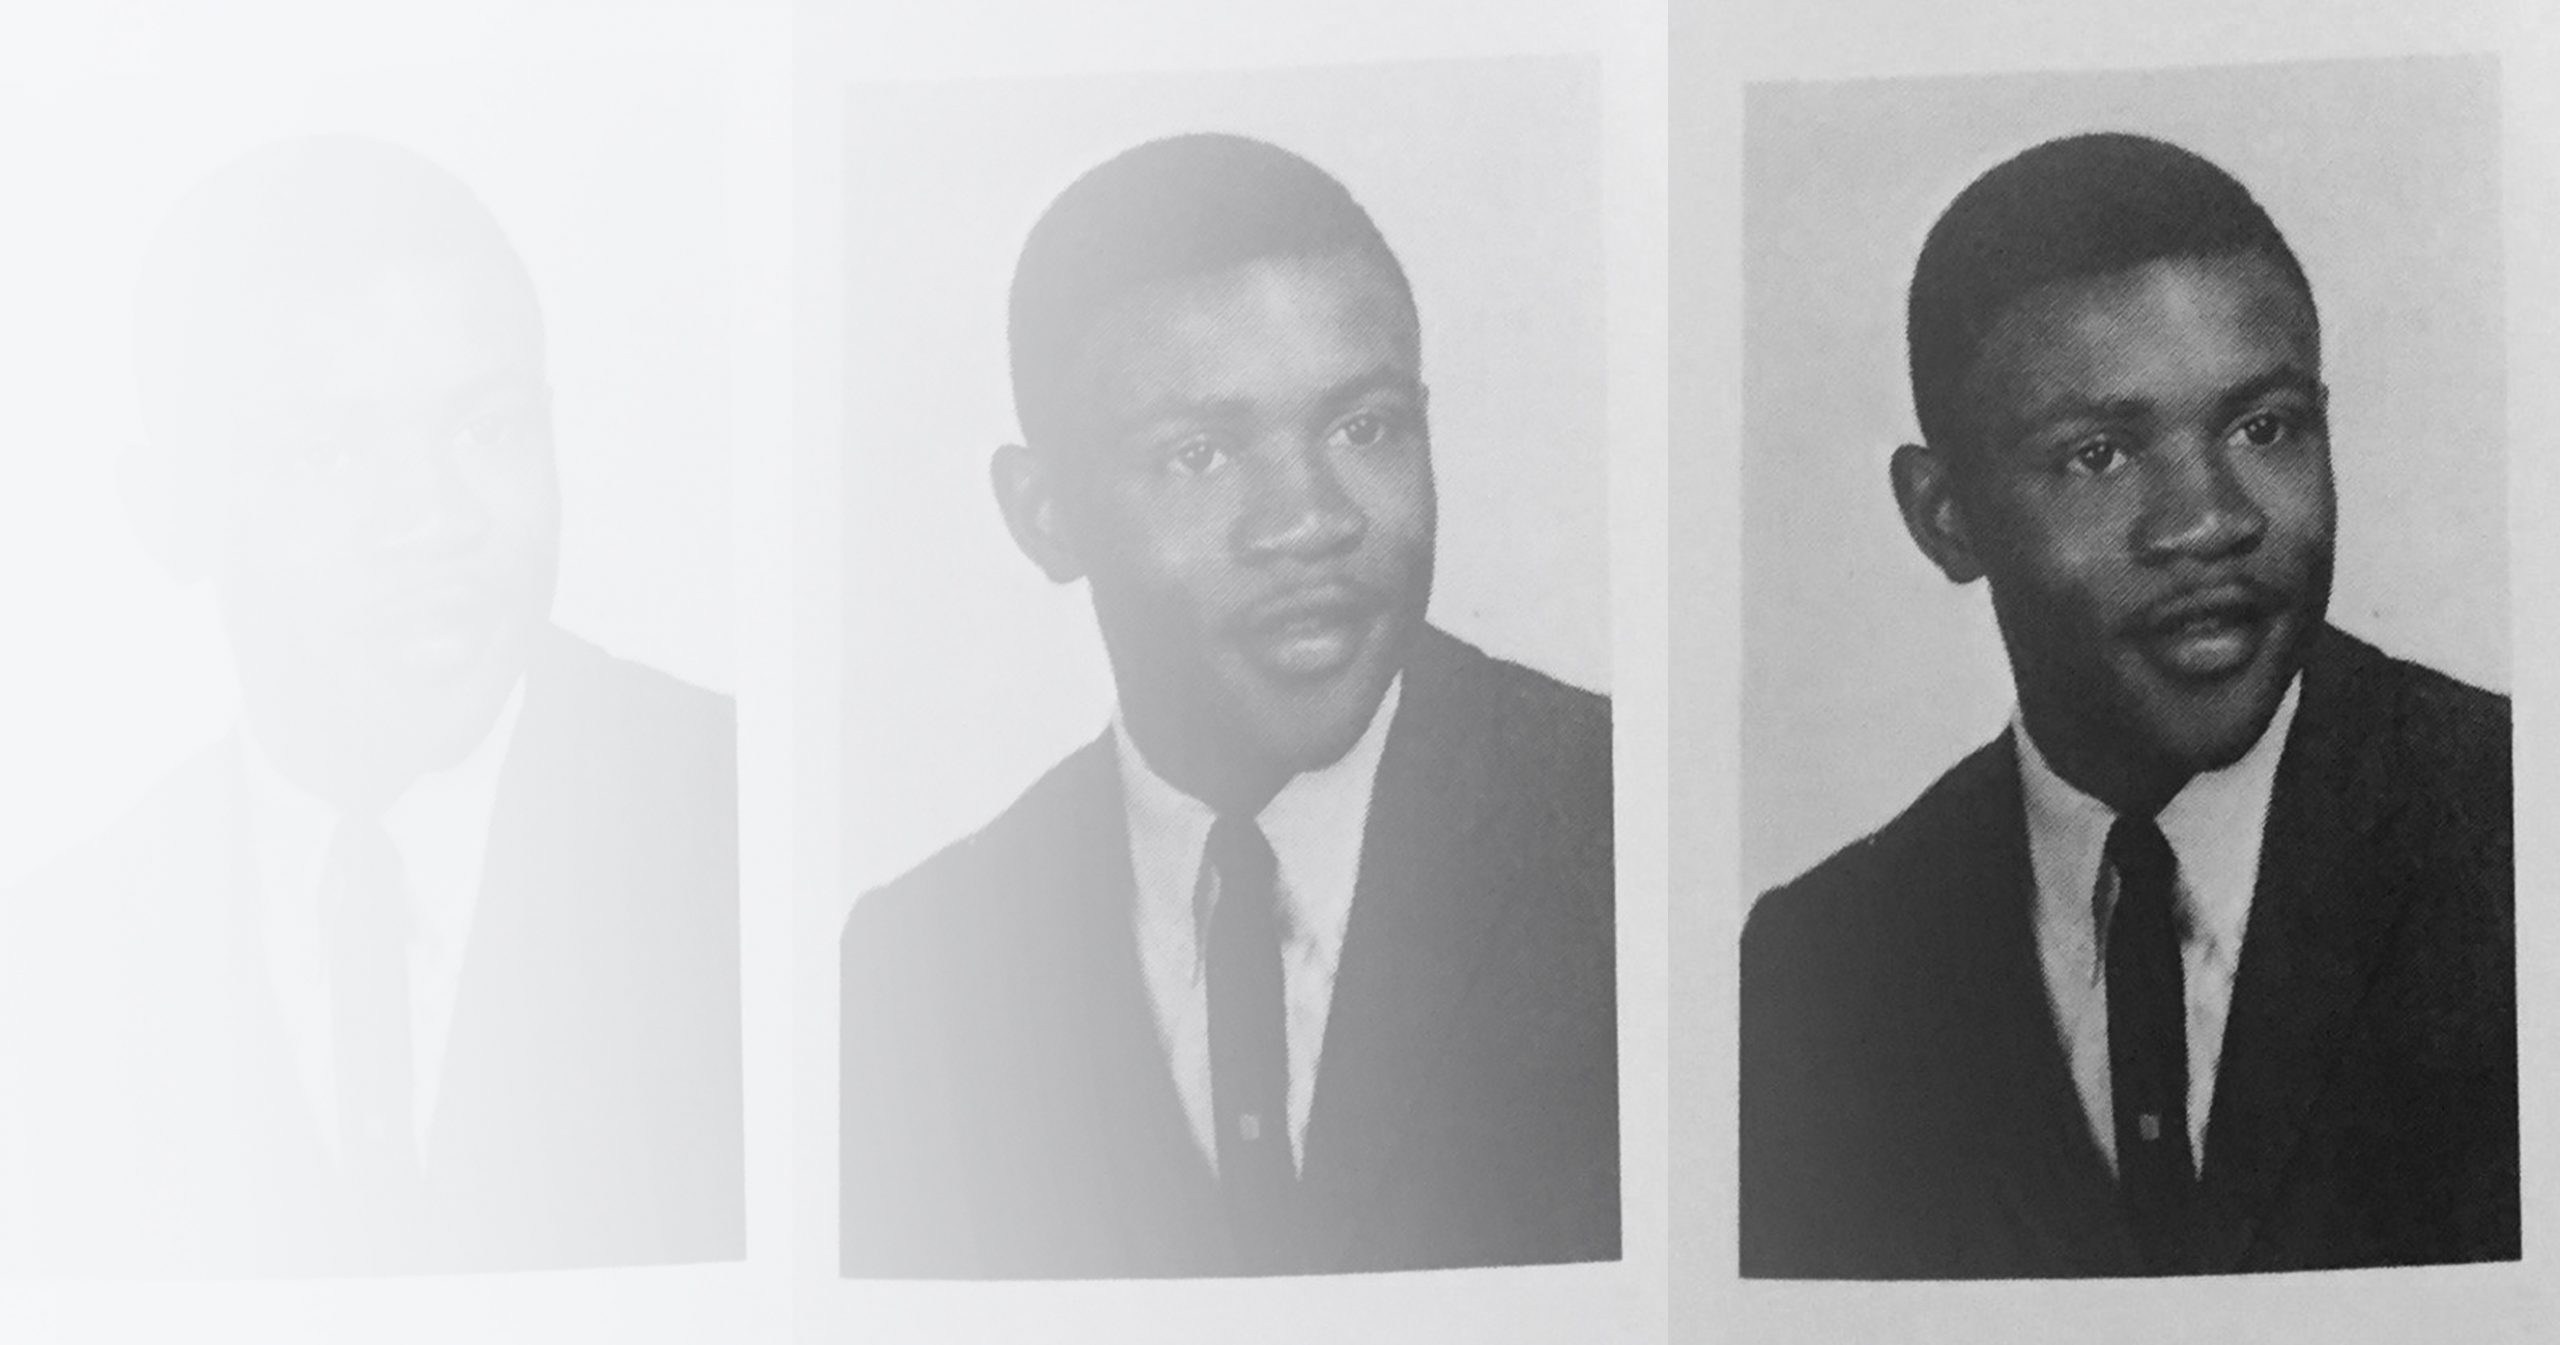 DOJ Opens Investigation Into 50-Year-Old Murder of Chapel Hill’s James Cates